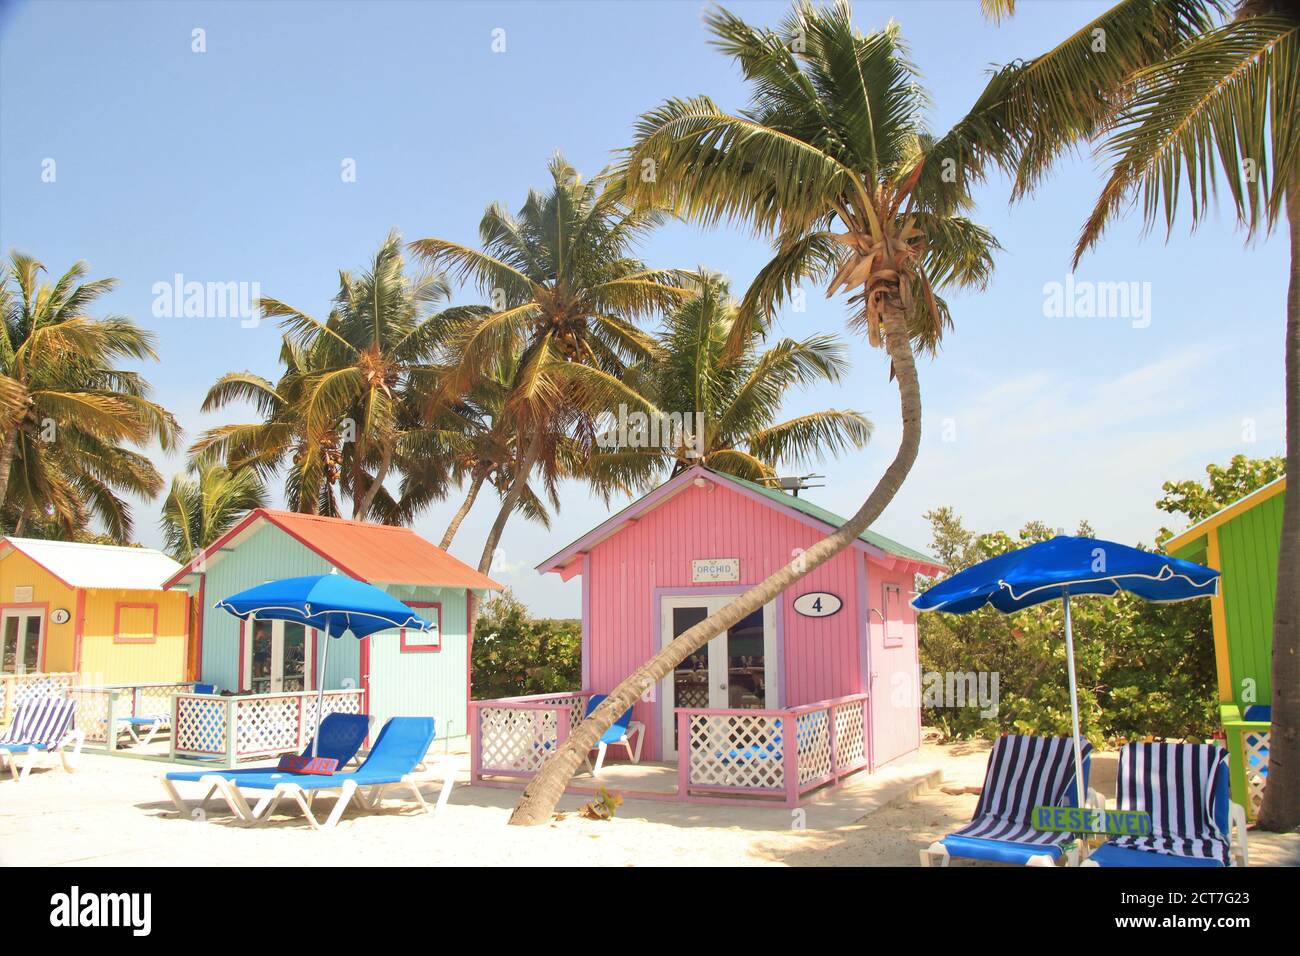 Colorful cabanas and lounge chairs along the beach at Princess Cays in the Bahamas Stock Photo